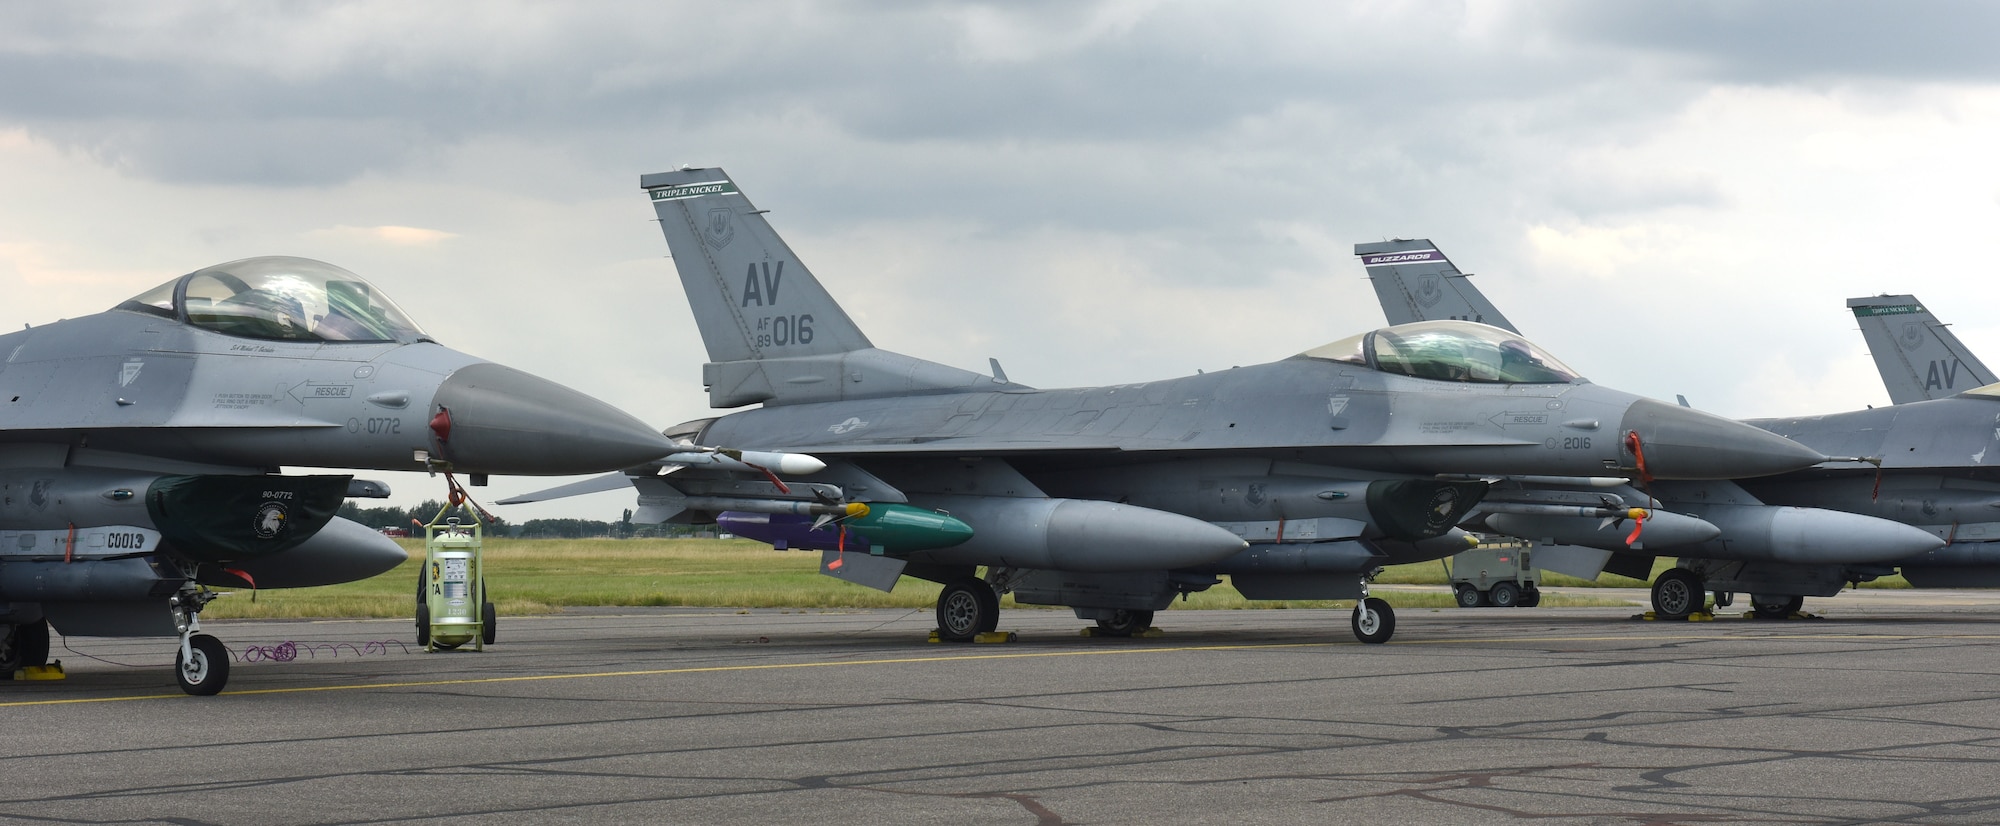 U.S. Air Force F-16 Fighting Falcon aircraft assigned to the 31st Fighter Wing, Aviano Air Base, Italy, sit on the flightline at Royal Air Force Mildenhall, England, Aug. 3, 2021. The F-16 is a compact, multi-role aircraft which is maneuverable and has proven itself in air-to-air combat and air-to-surface attack. (U.S. Air Force photo by Karen Abeyasekere)